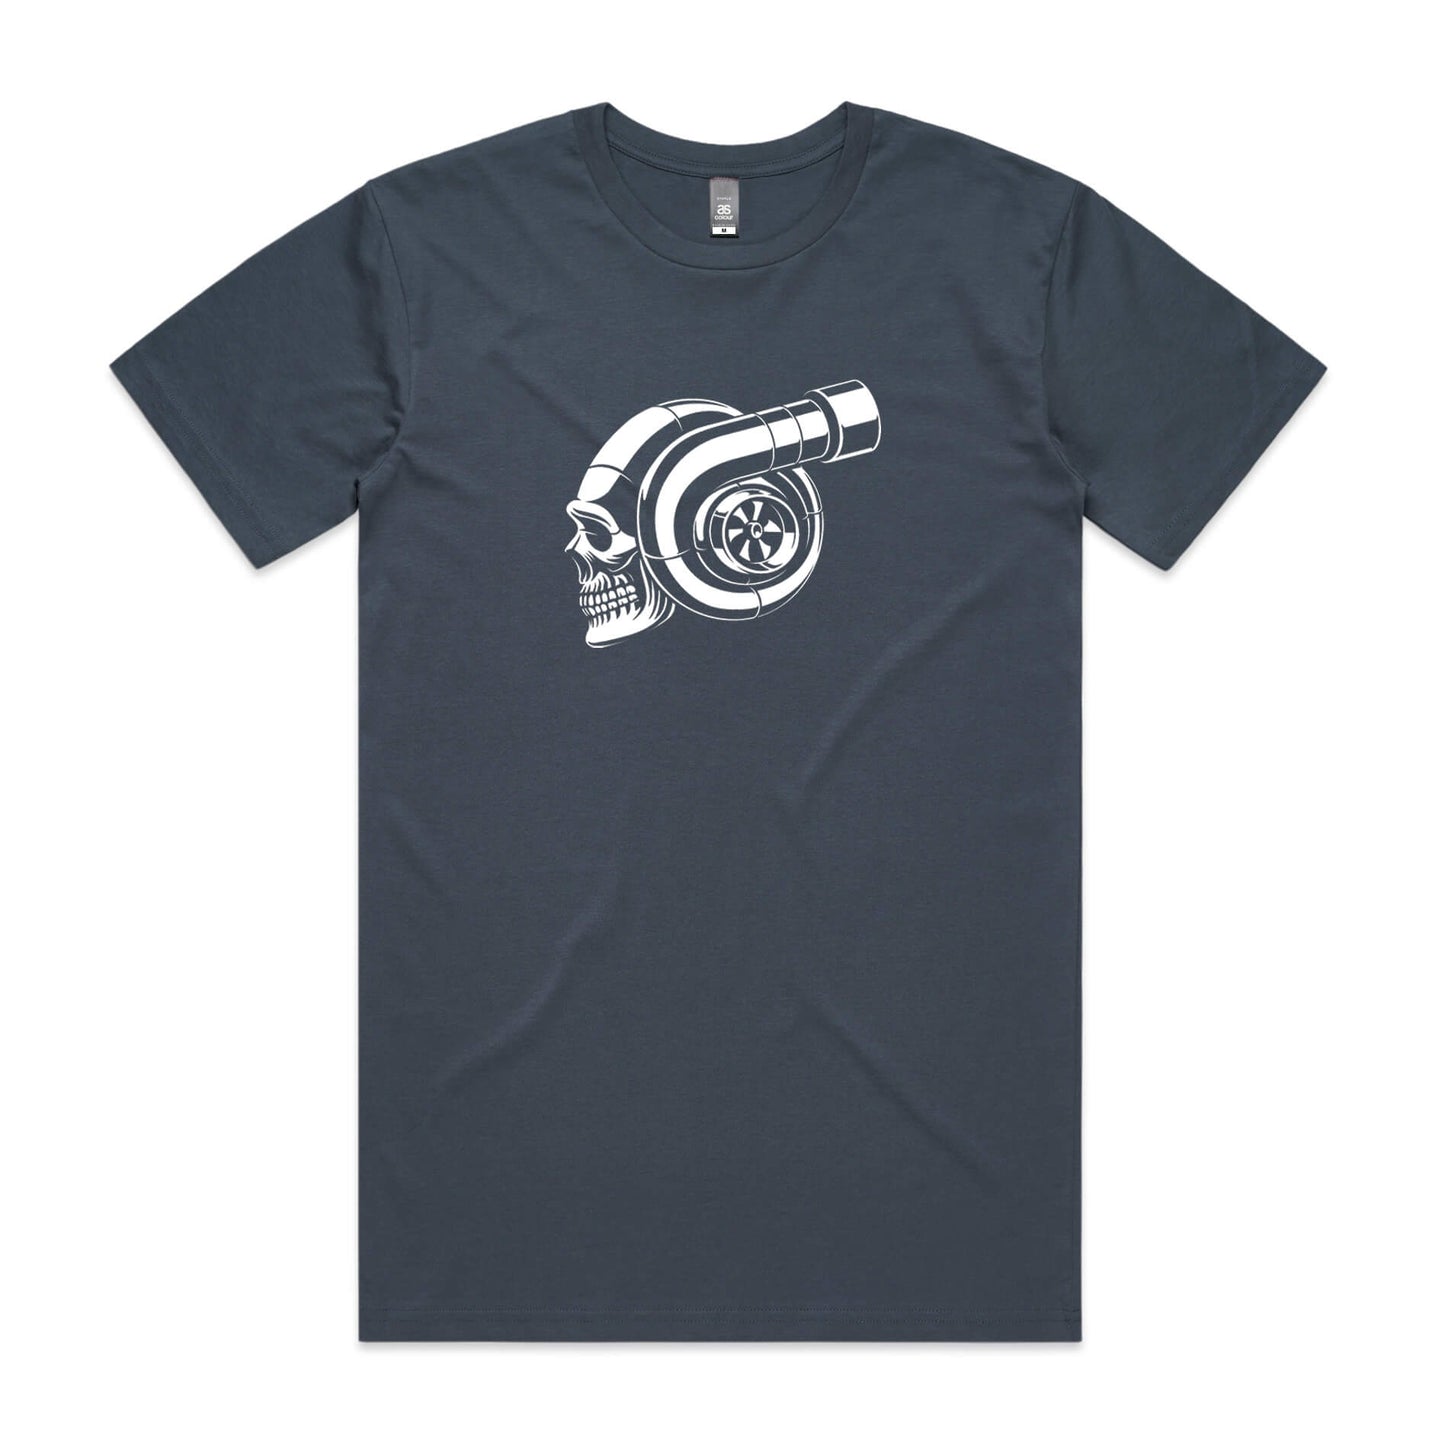 Boosted t-shirt in petrol blue with a white graphic of a skull and turbocharger